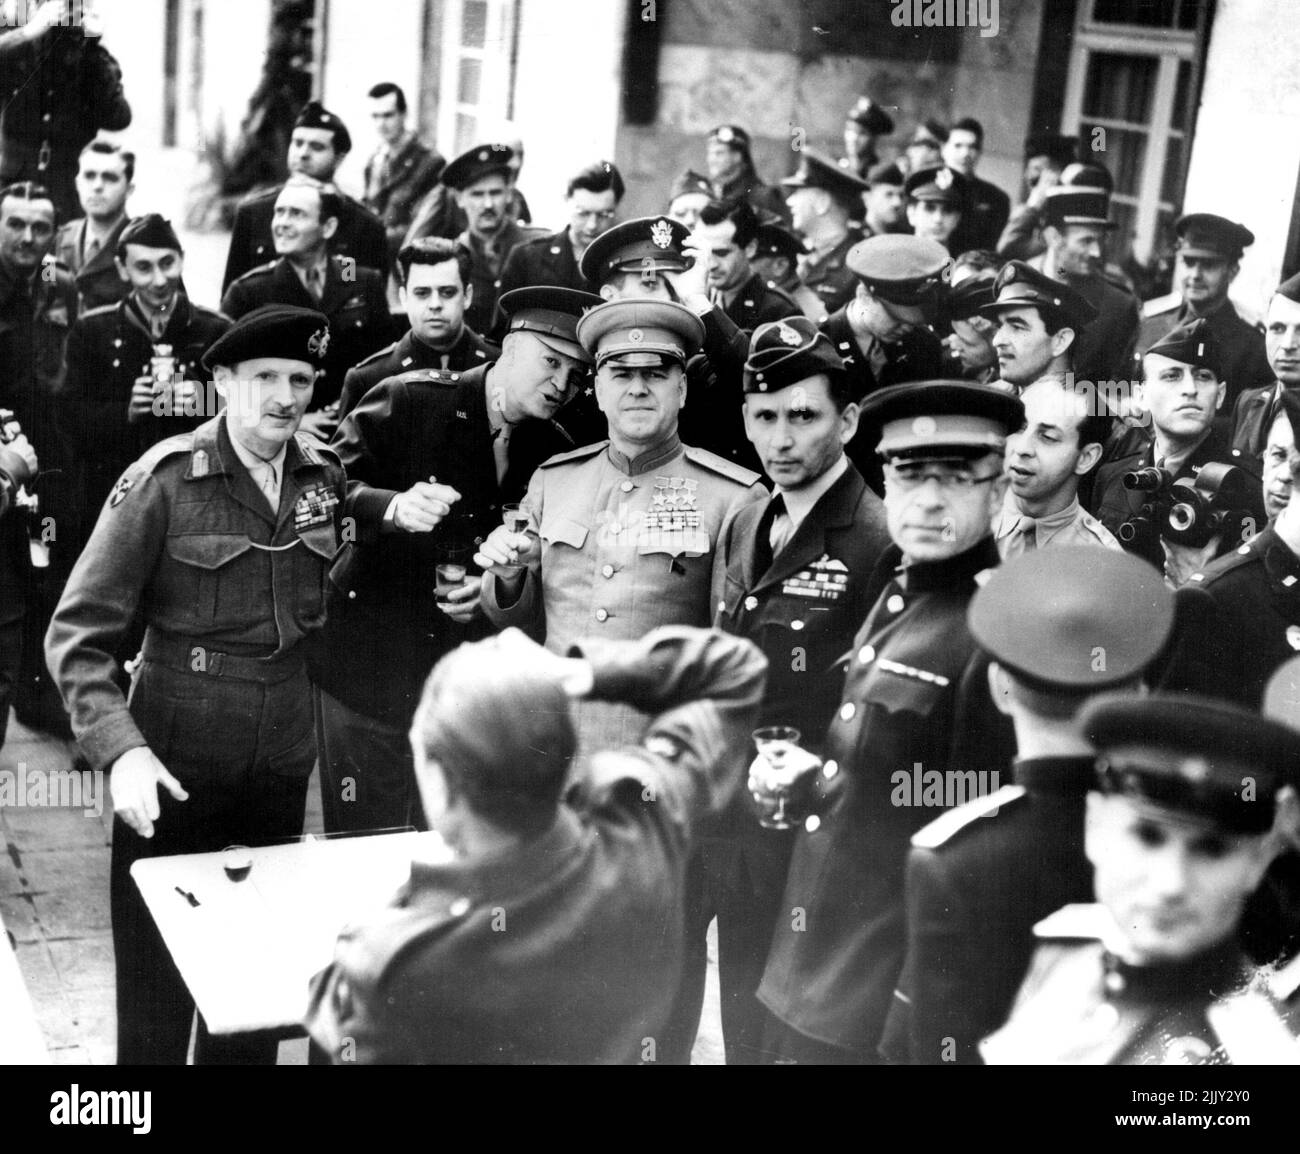 Twilight Of The Nazis - Allied leader meet in Frankfurt to toast the victory of Germany after the signing (May 7, 1945) of the German surrender. Left to right are: Field Marshall Bernard Montgomery; General Dwight D. Eisenhower; Soviet Marshal Gregori Zhukov; and British air chief Marshal Sir Arthur Tedder. May 4, 1955. (Photo by United Press). Stock Photo